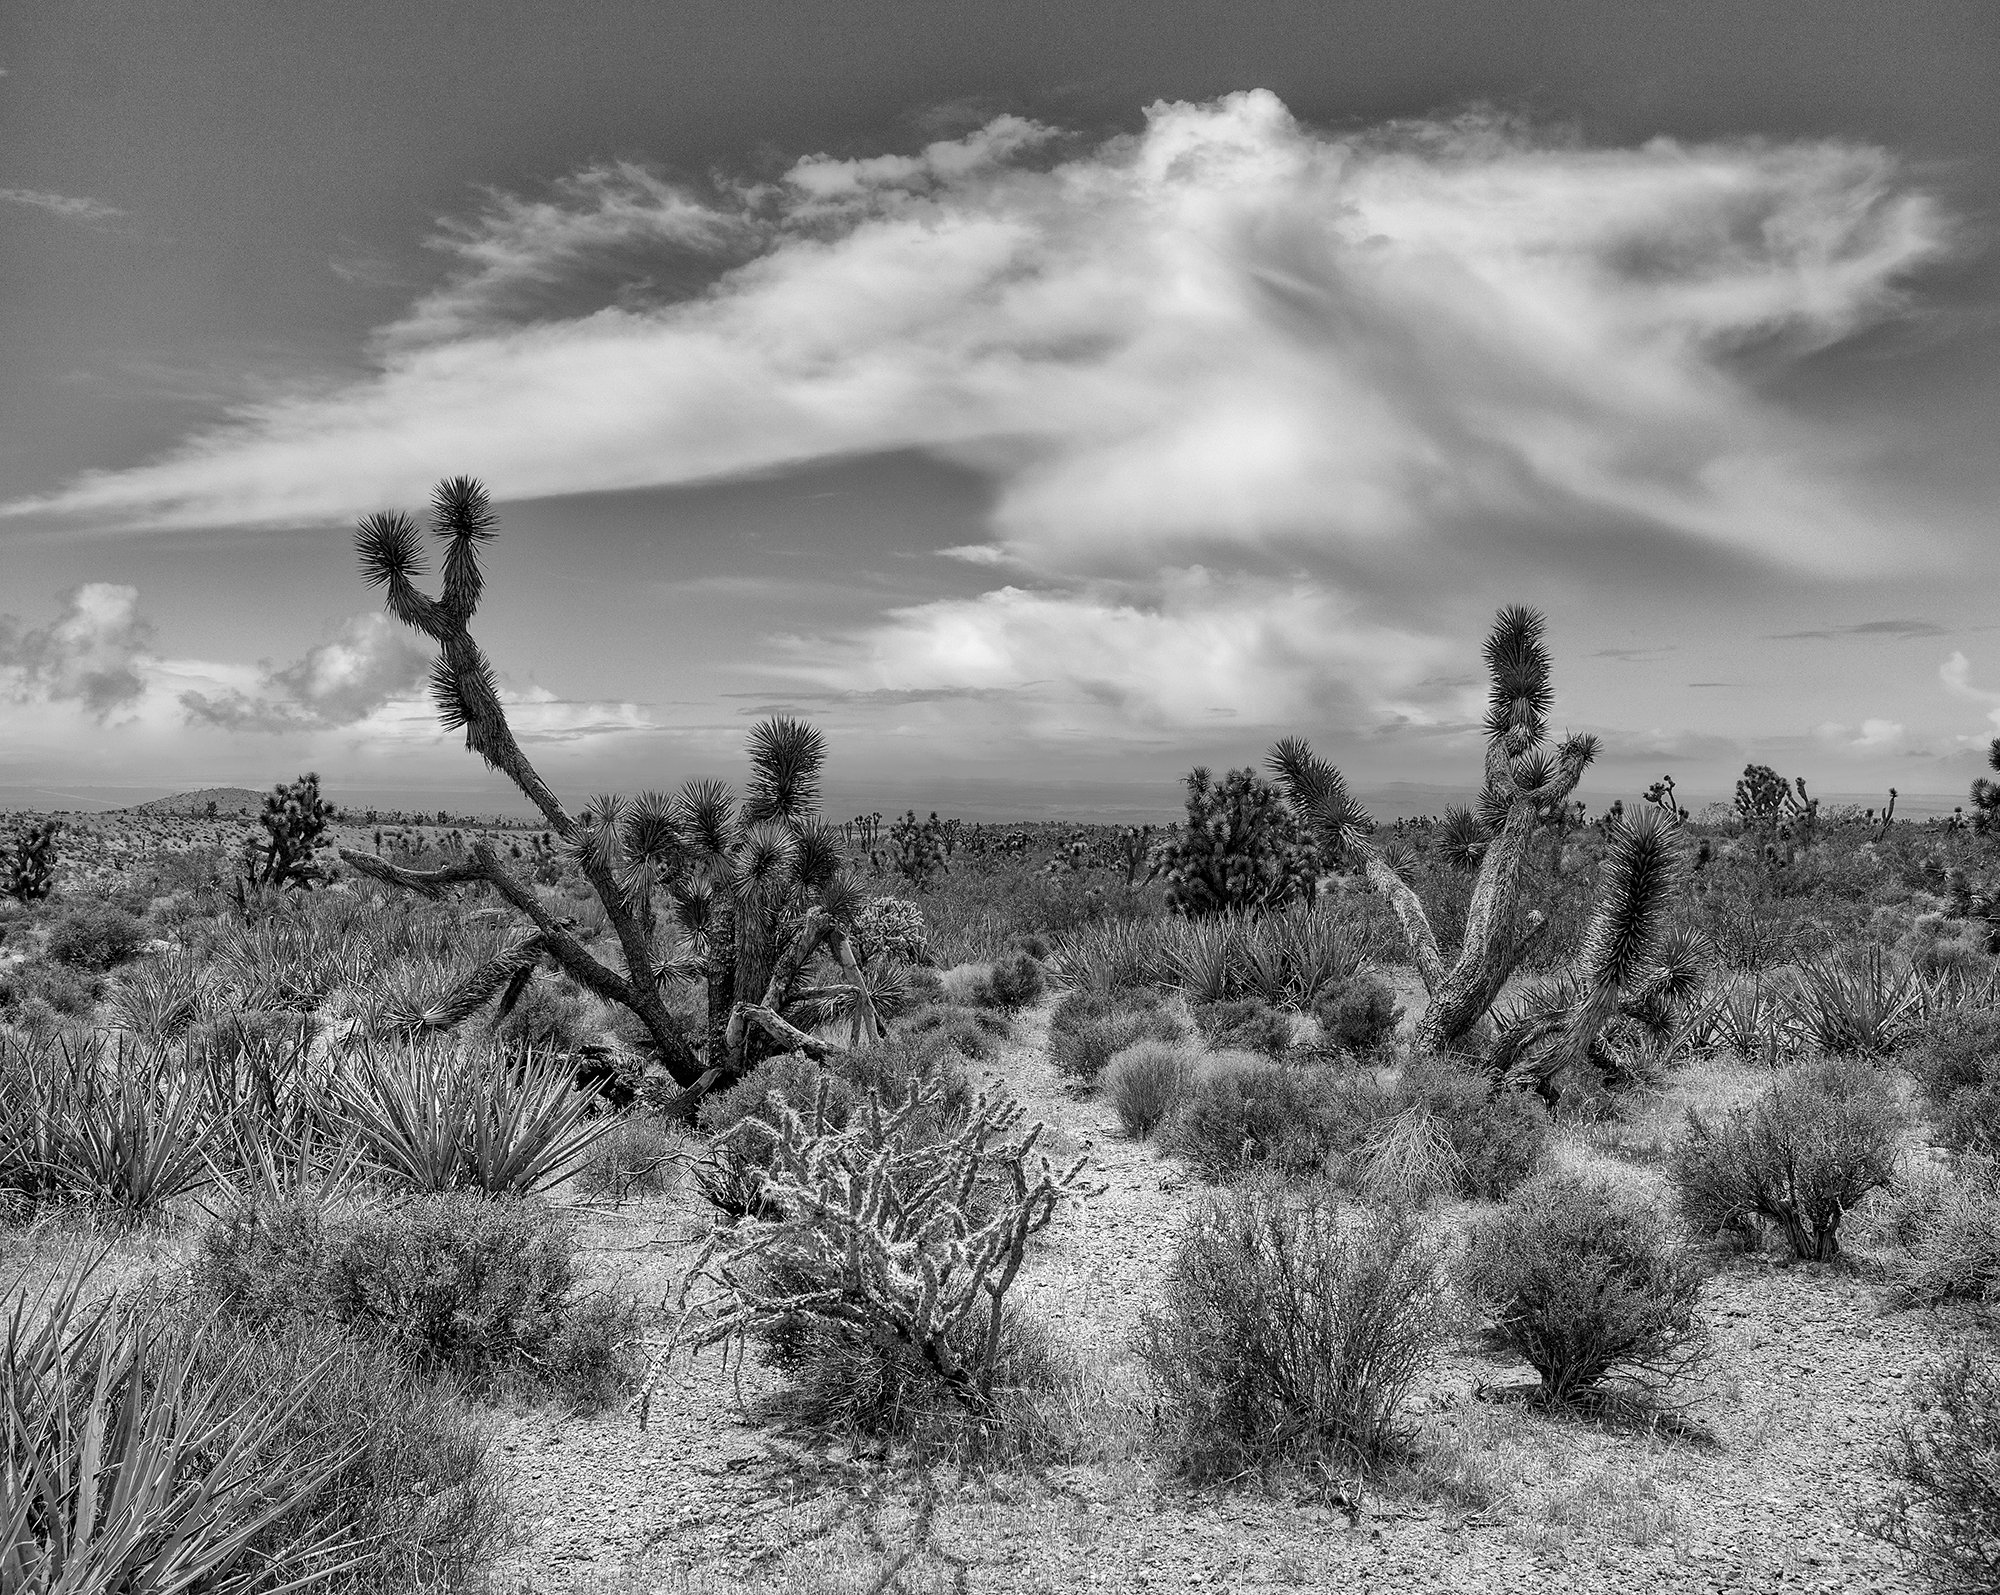 American Southwest black and white landscape of Joshua Tree National Park in California Photography Pierre Toutain-Dorbec.jpg